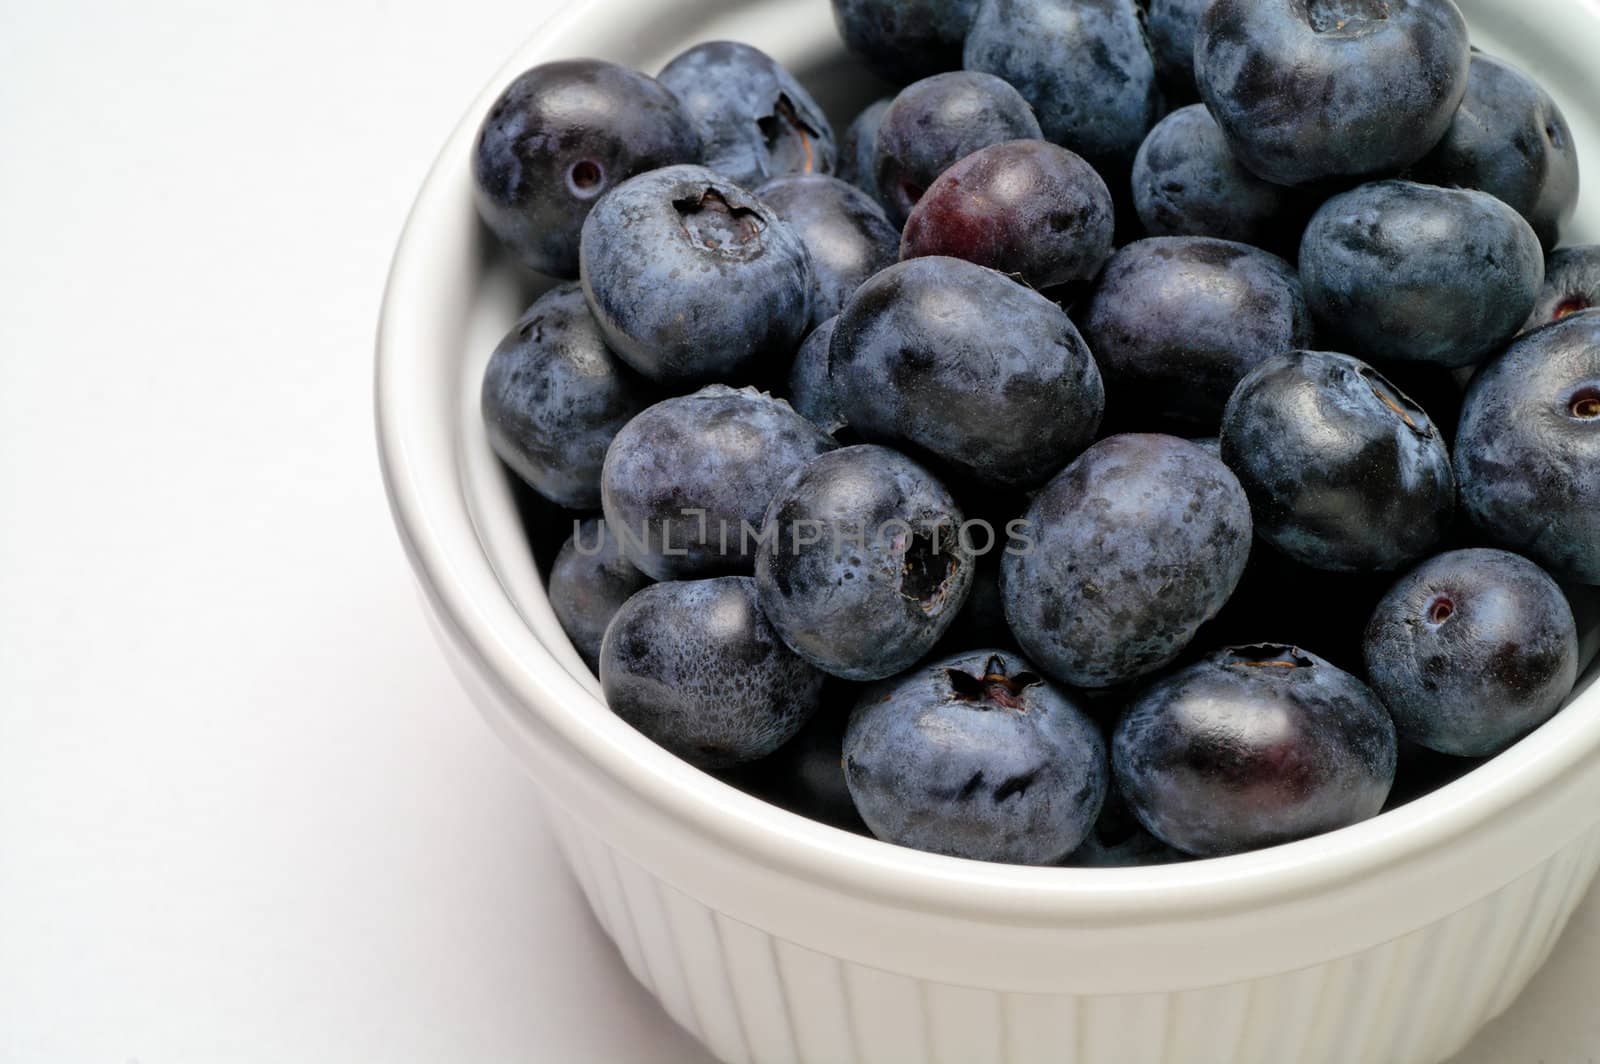 Blueberries in a cup (2) by Laborer